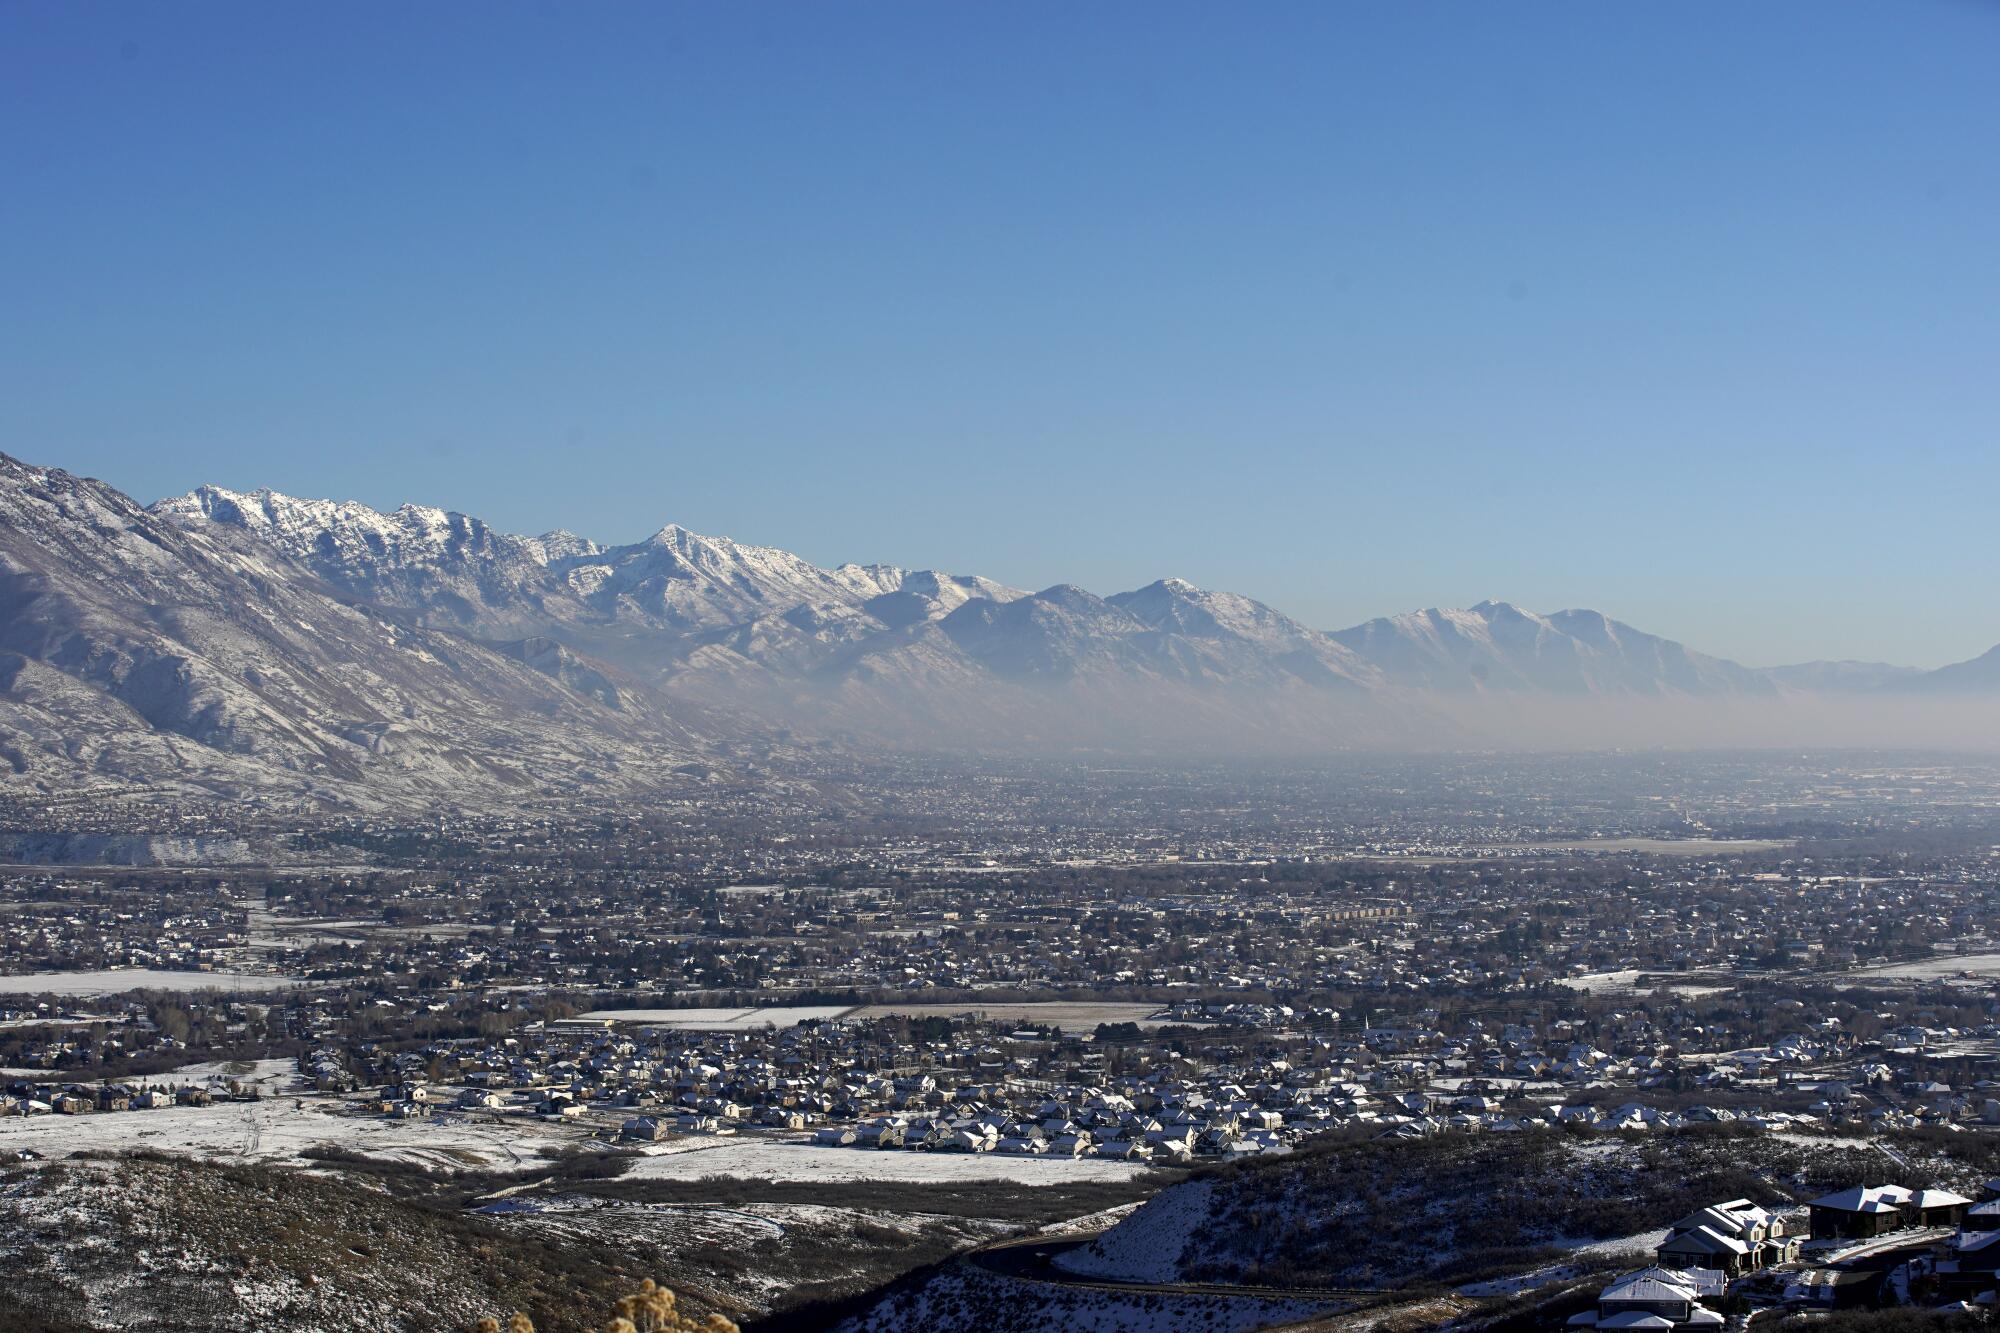 The community of American Fork, Utah, at the base of the Wasatch Range.